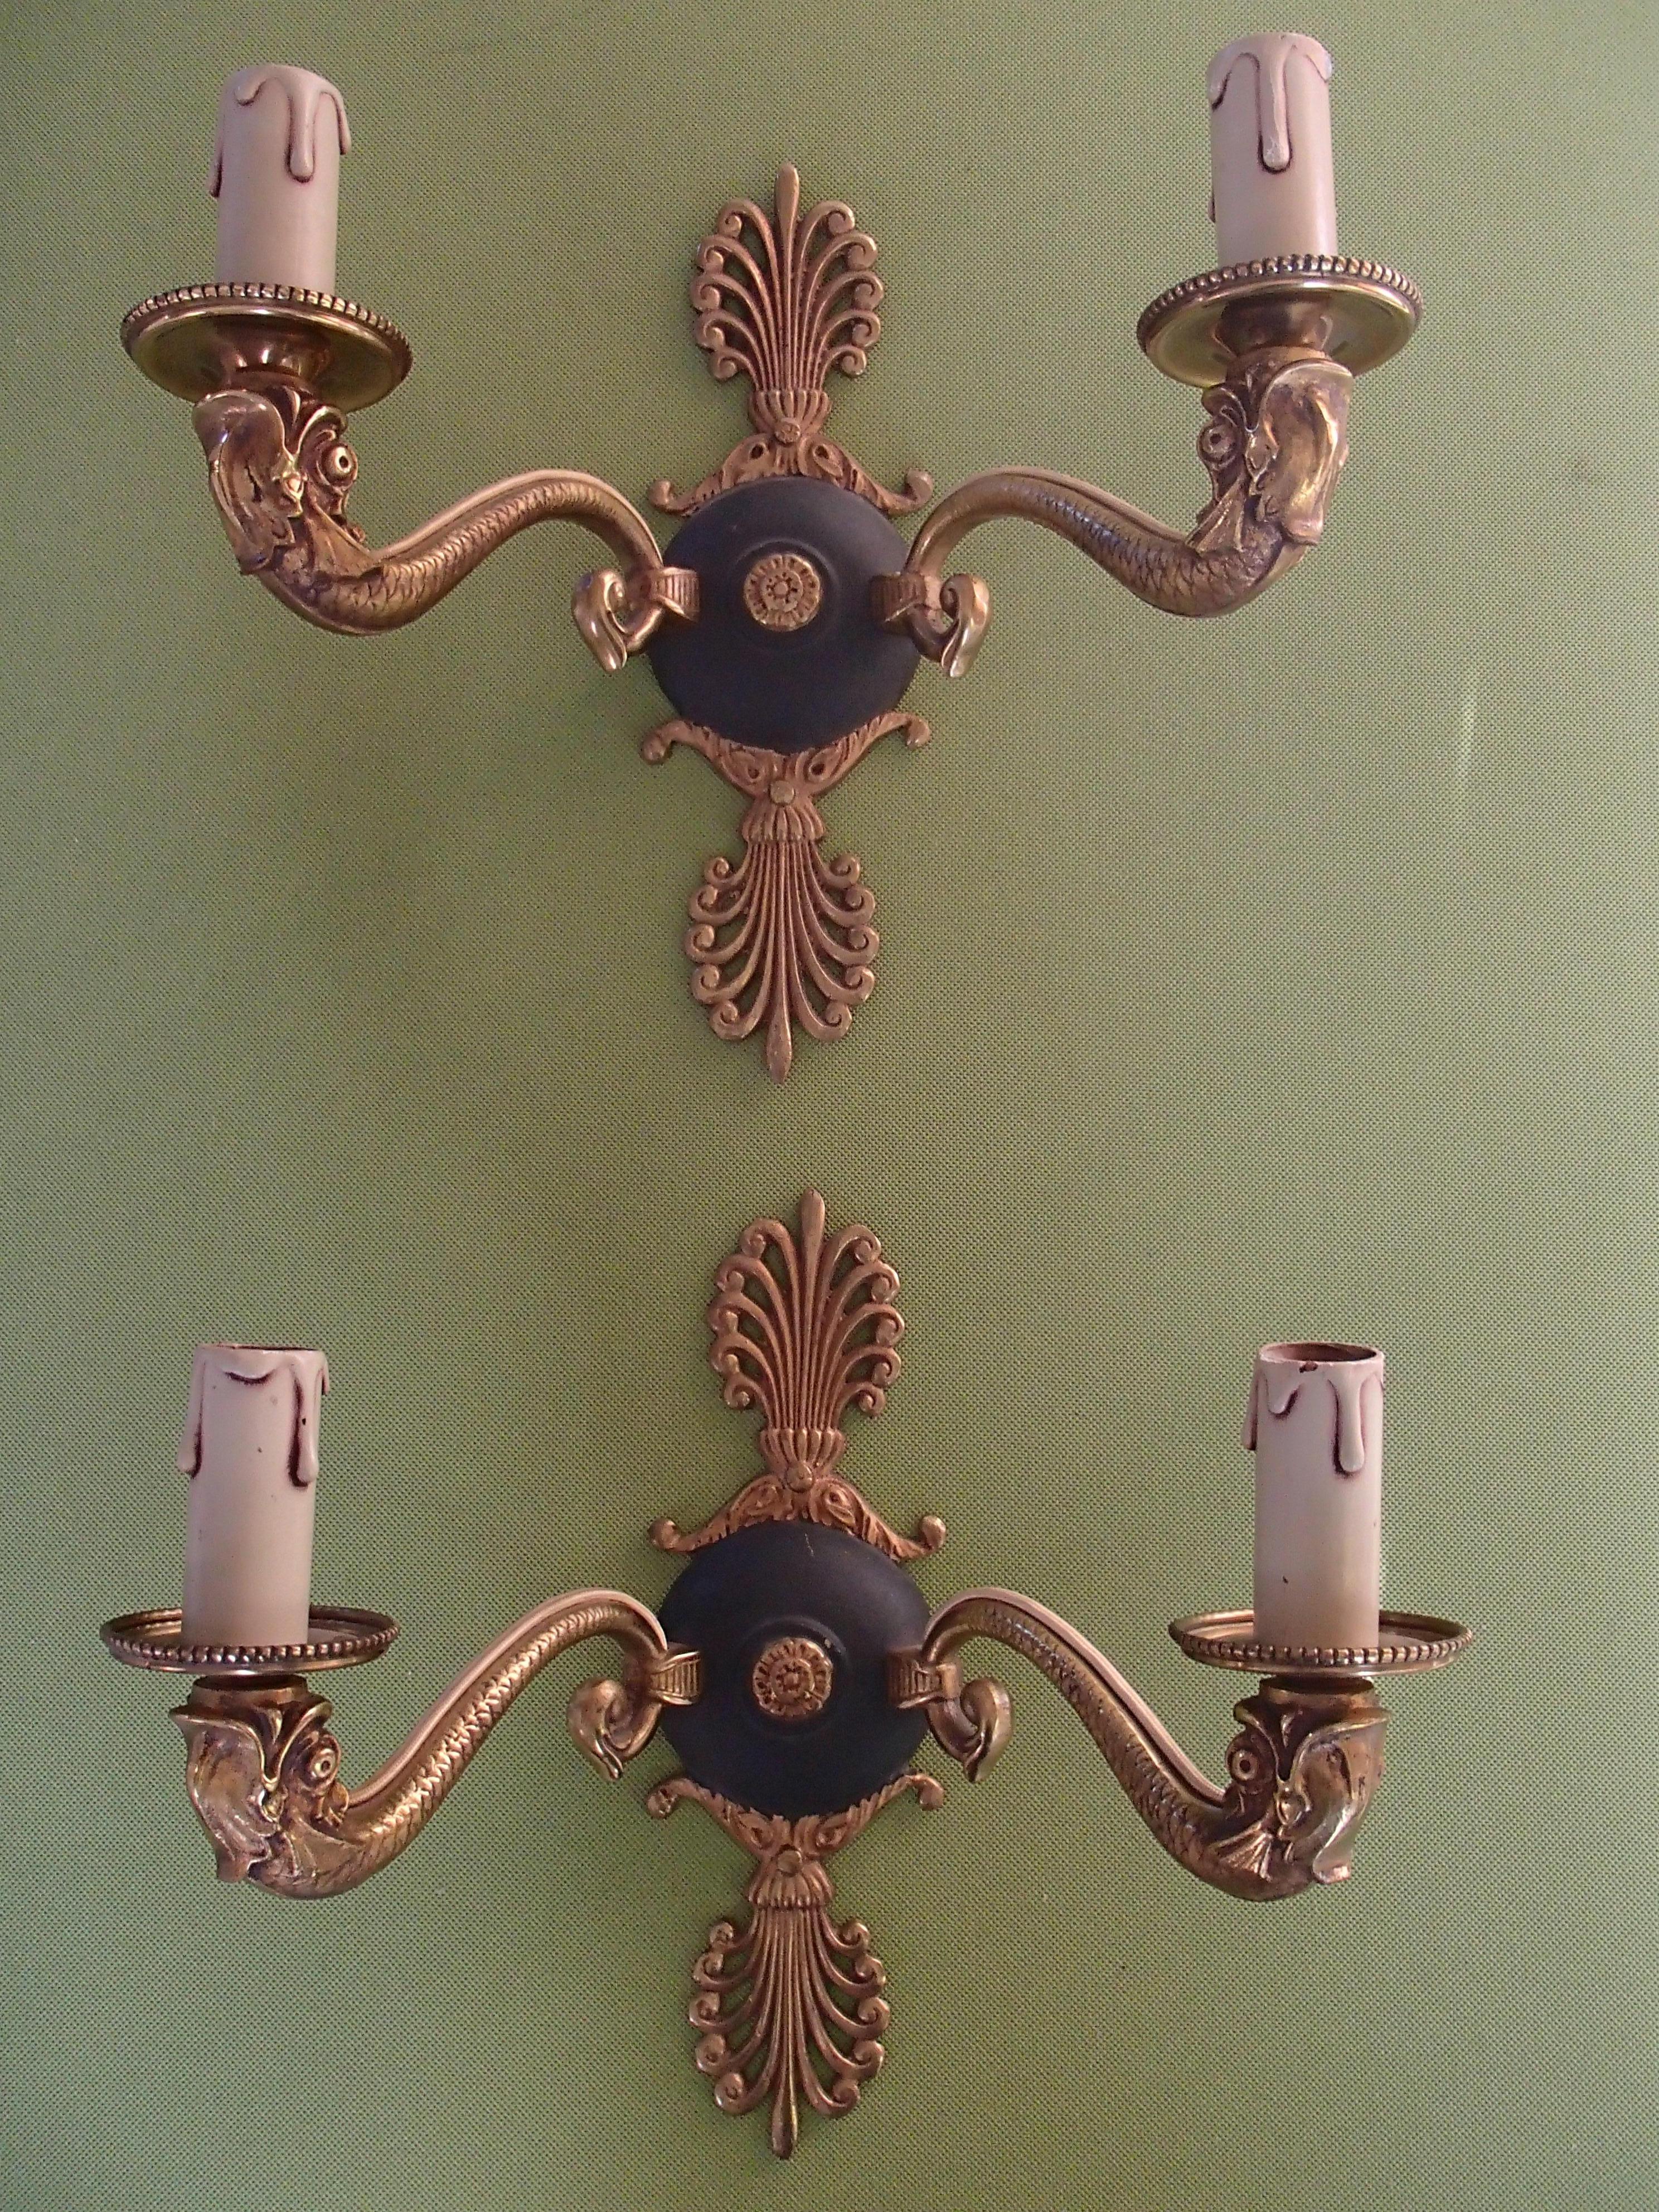 Pair of bronze and green Empire wall lights with beige/green shades.